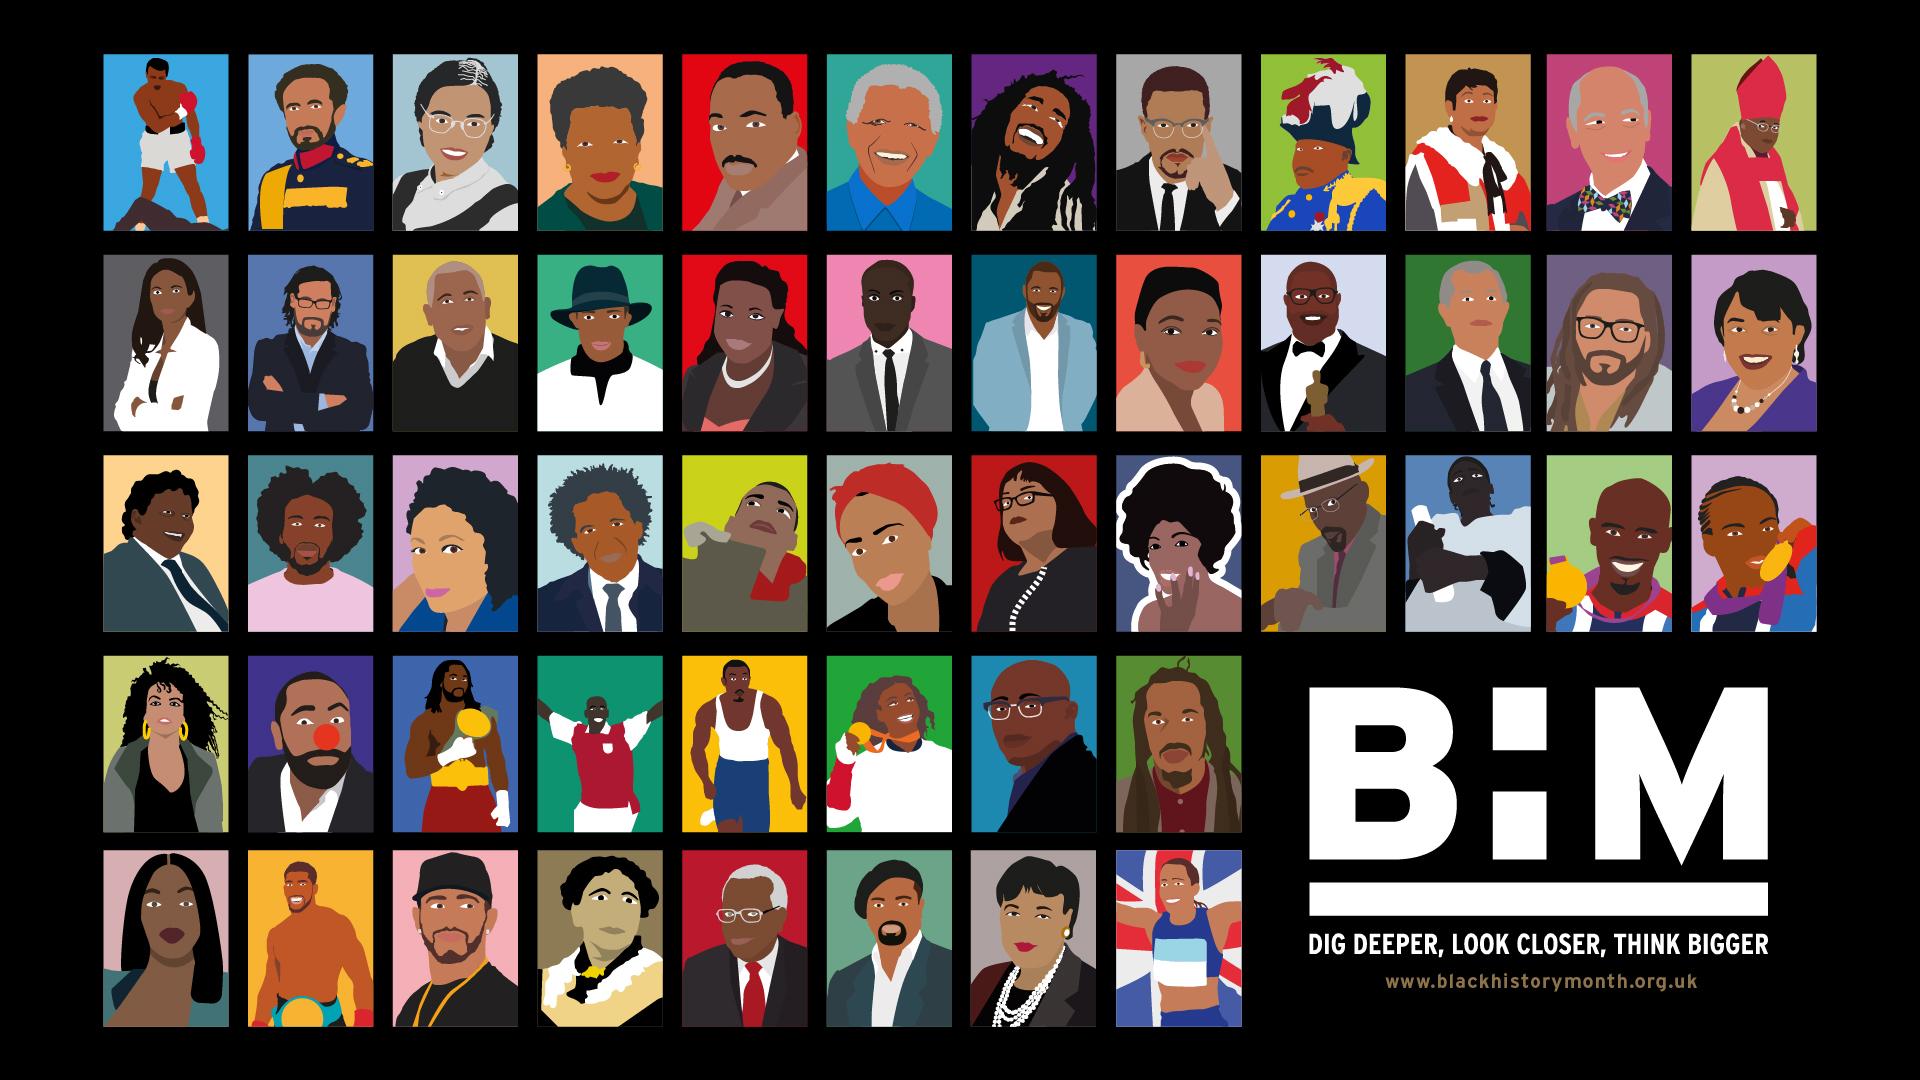 18014 Black History Month Background Images Stock Photos  Vectors   Shutterstock